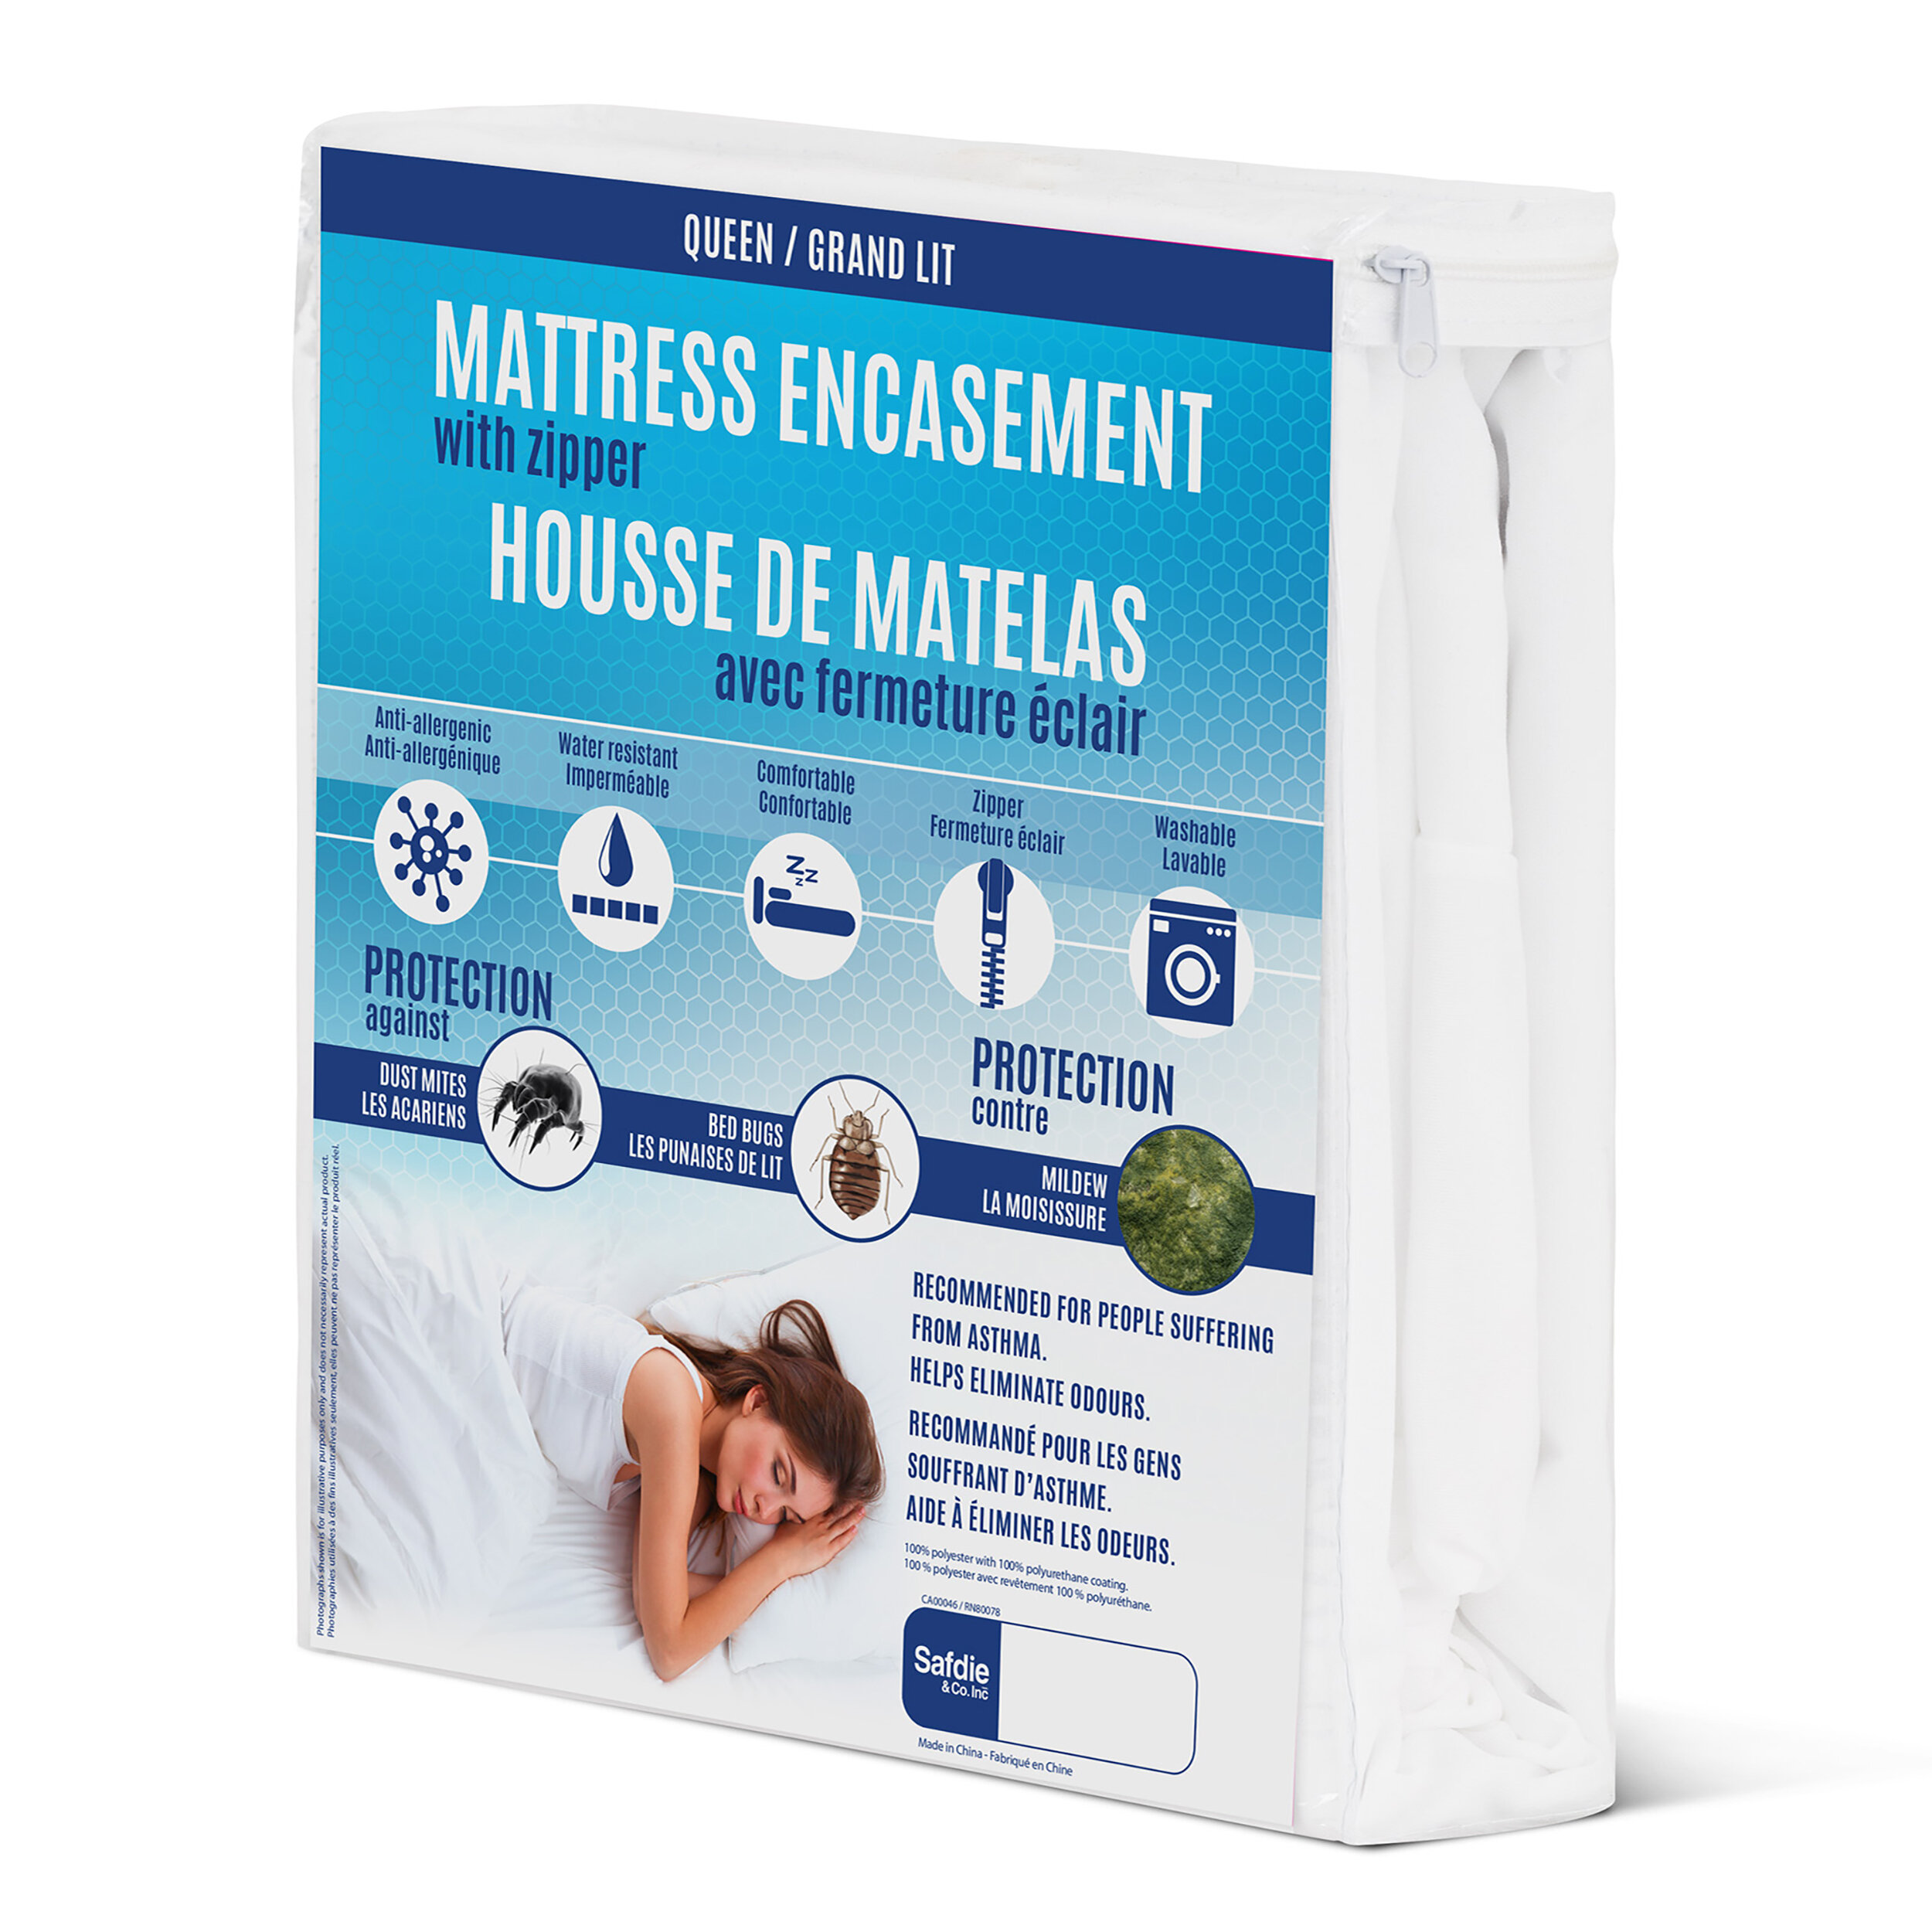 Anti Bed Bug, Dust Mite, Allergen, and Bacteria Protective Full Mattress  Encasement for Full Size Bed